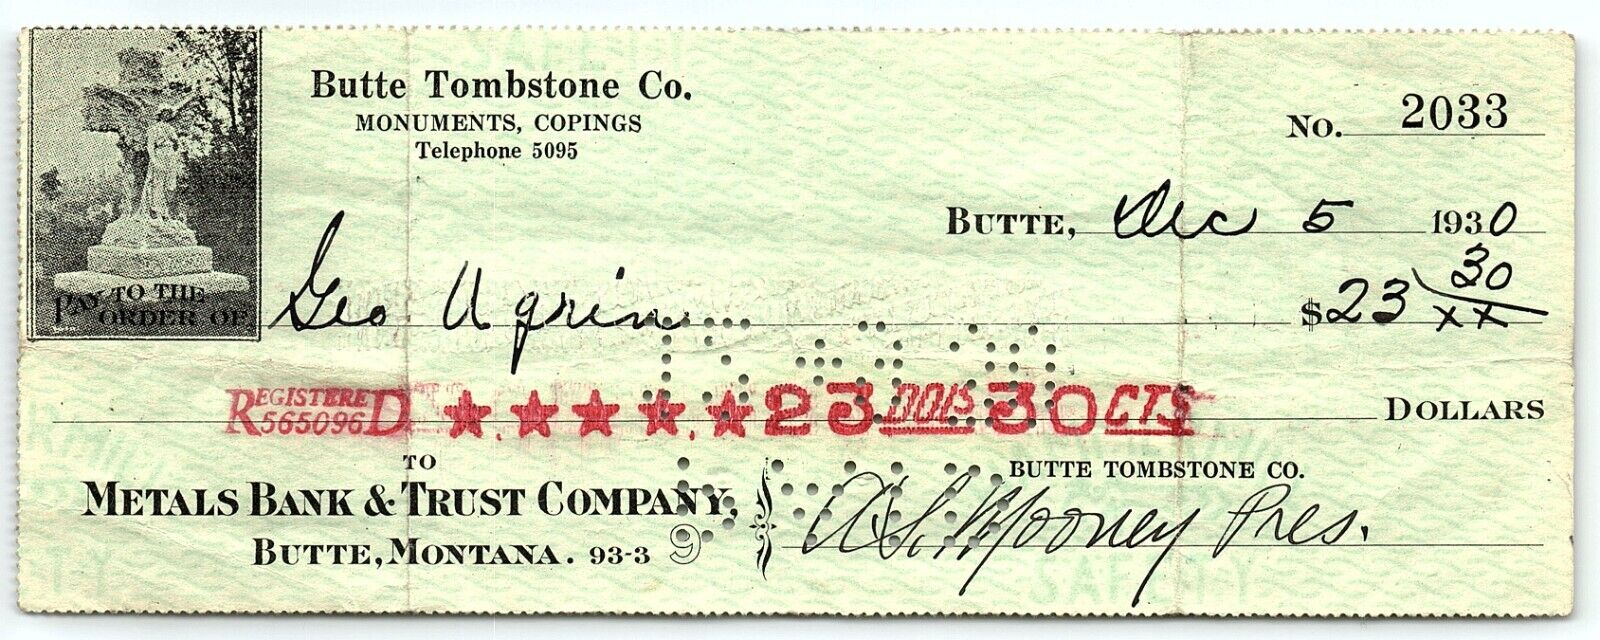 1930 BUTTE MONTANA BUTTE TOMBSTONE CO METALS BANK & TRUST COMPANY CHECK Z1604